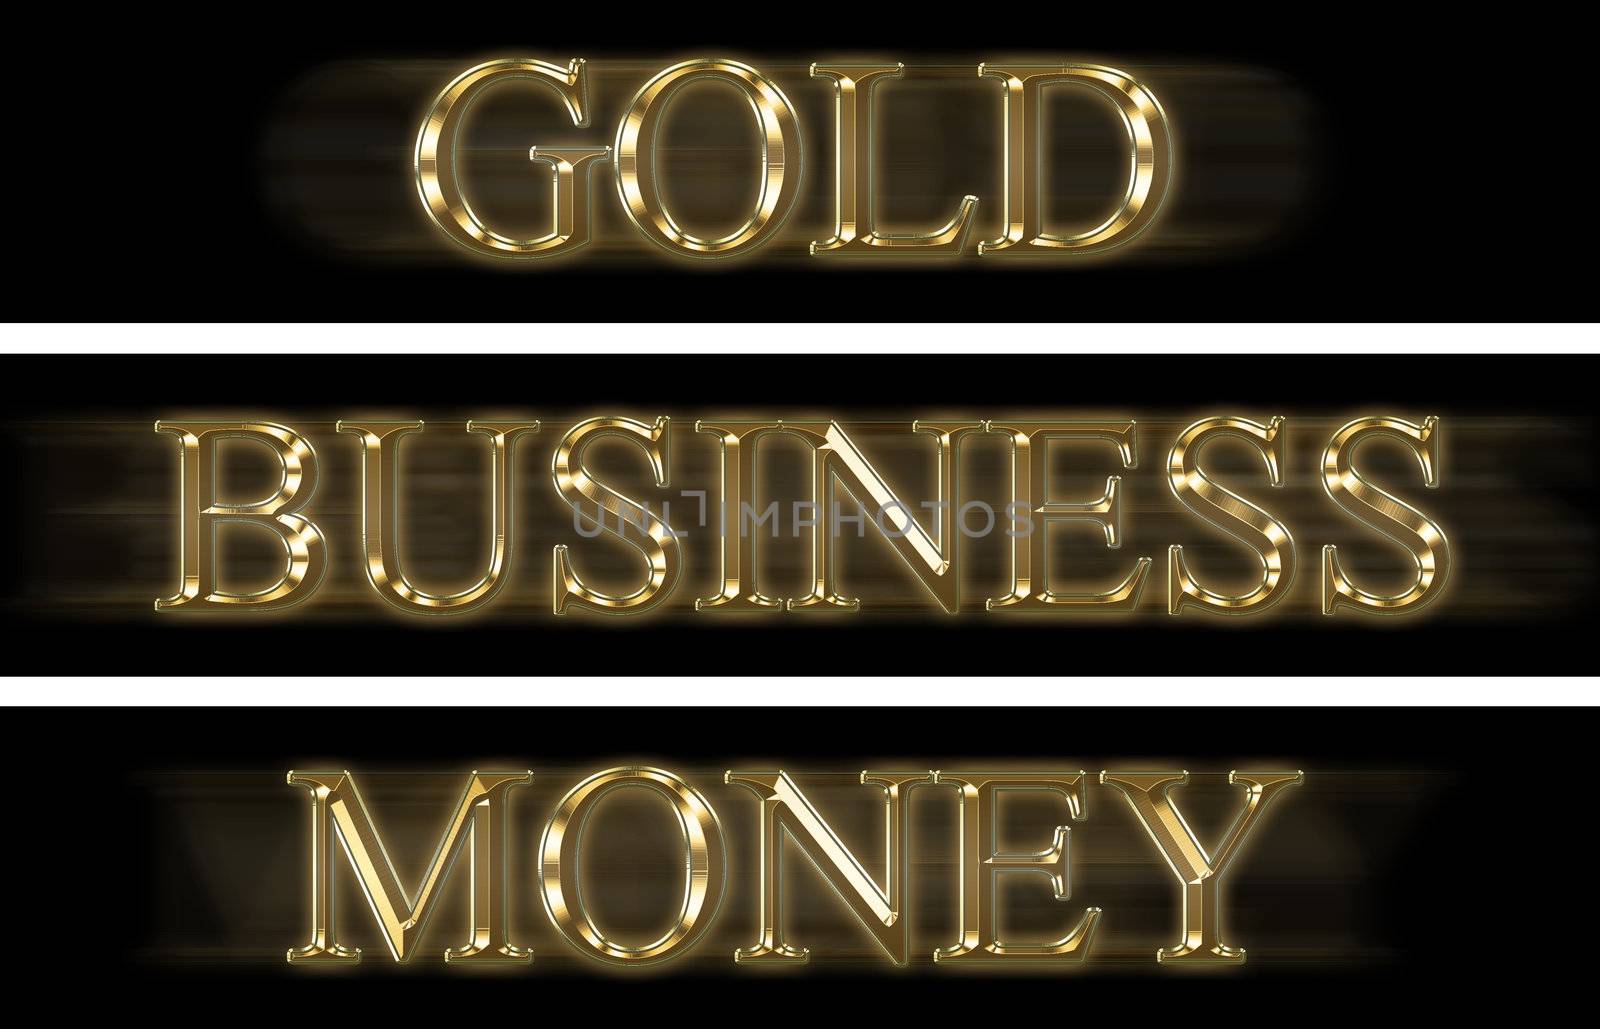 Three banners with golden text: gold, business, money by mozzyb